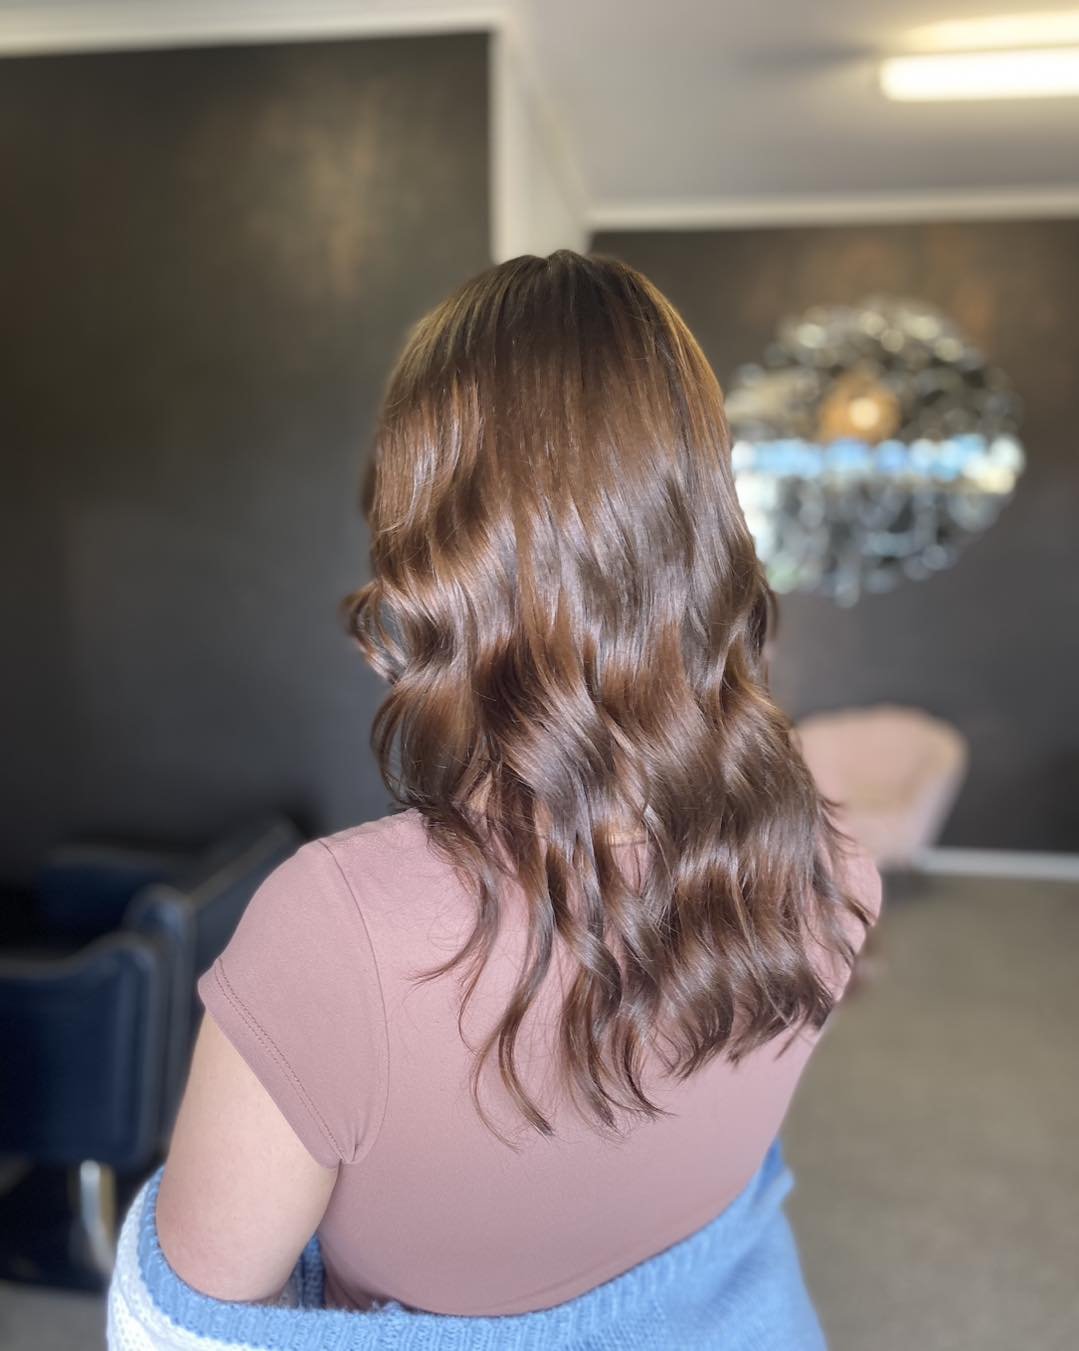 HOT DAMN&hellip; 🥵 

Such a glow up for this gorgeous lady 🤍✨ 

.
.
.

📞 (07) 4317 4192
🌐 www.iconsalonshb.comau
📍 1/40 Torquay Road Pialba QLD

.
.
.

#hairdresserherveybay #hairsalonherveybay #beautysalonherveybay #salonherveybay #cosmetictato